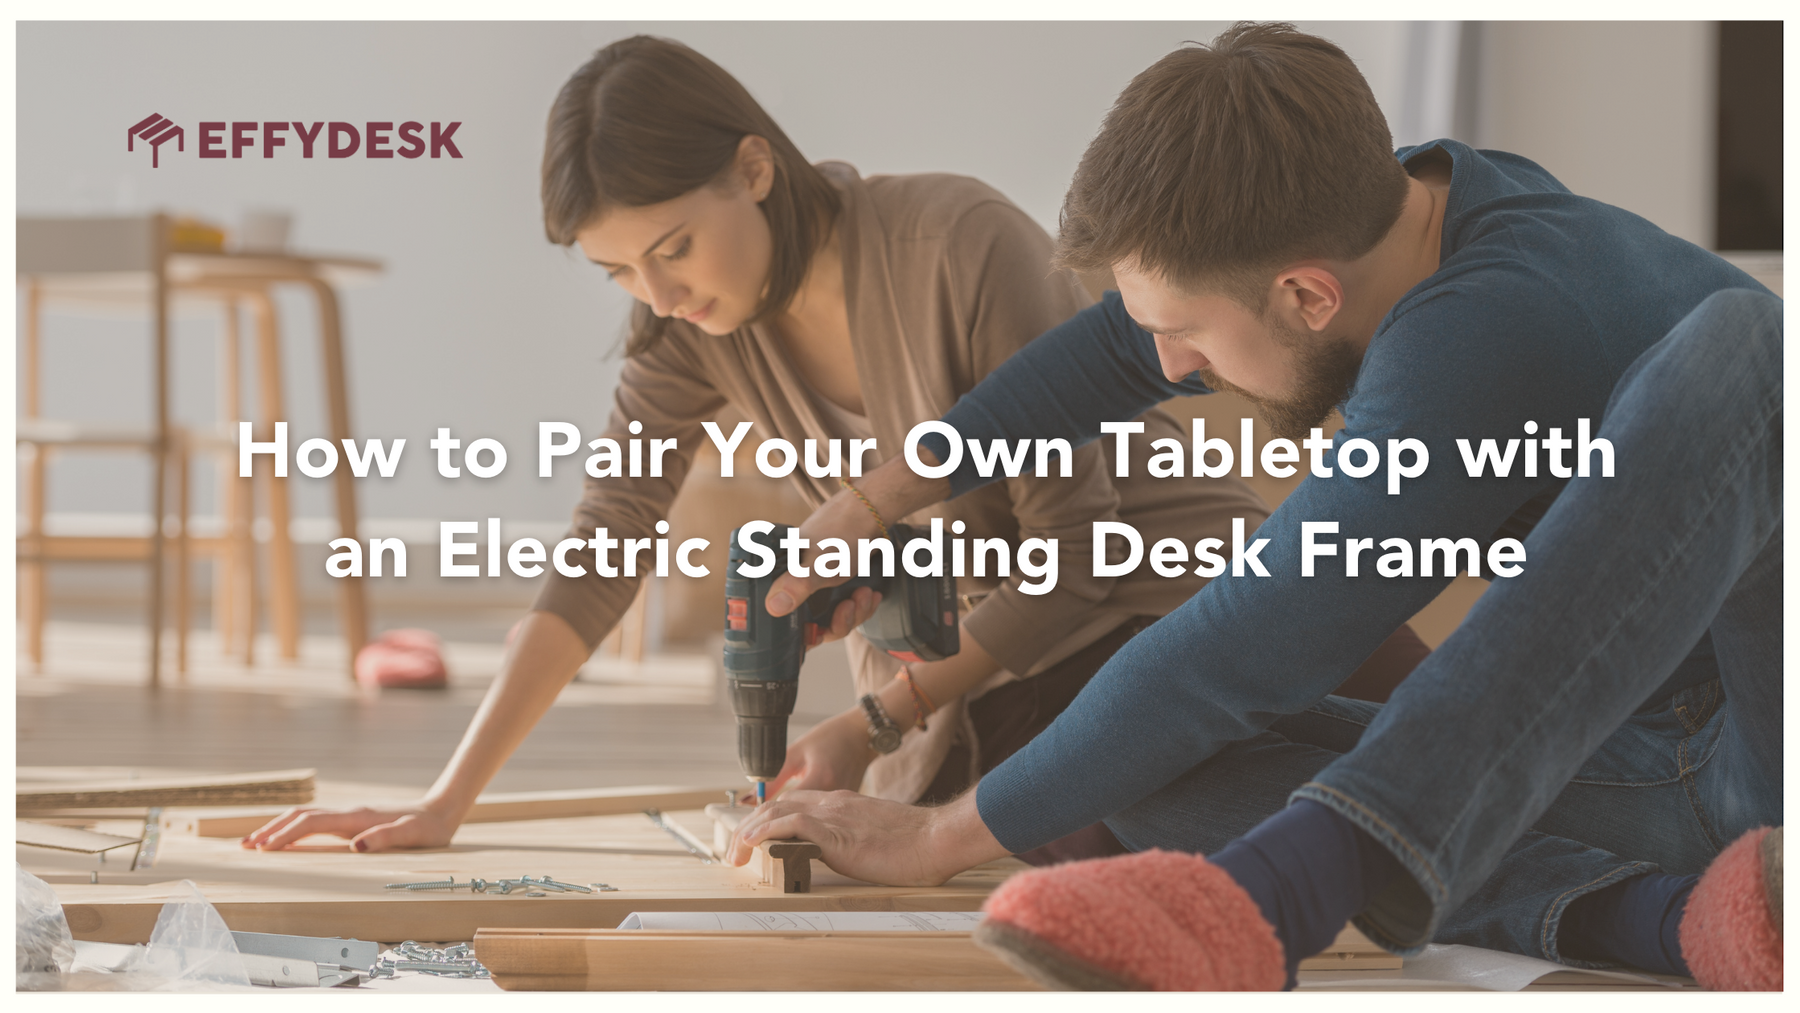 Some DIY standing desk tips and steps to let you choose the right material